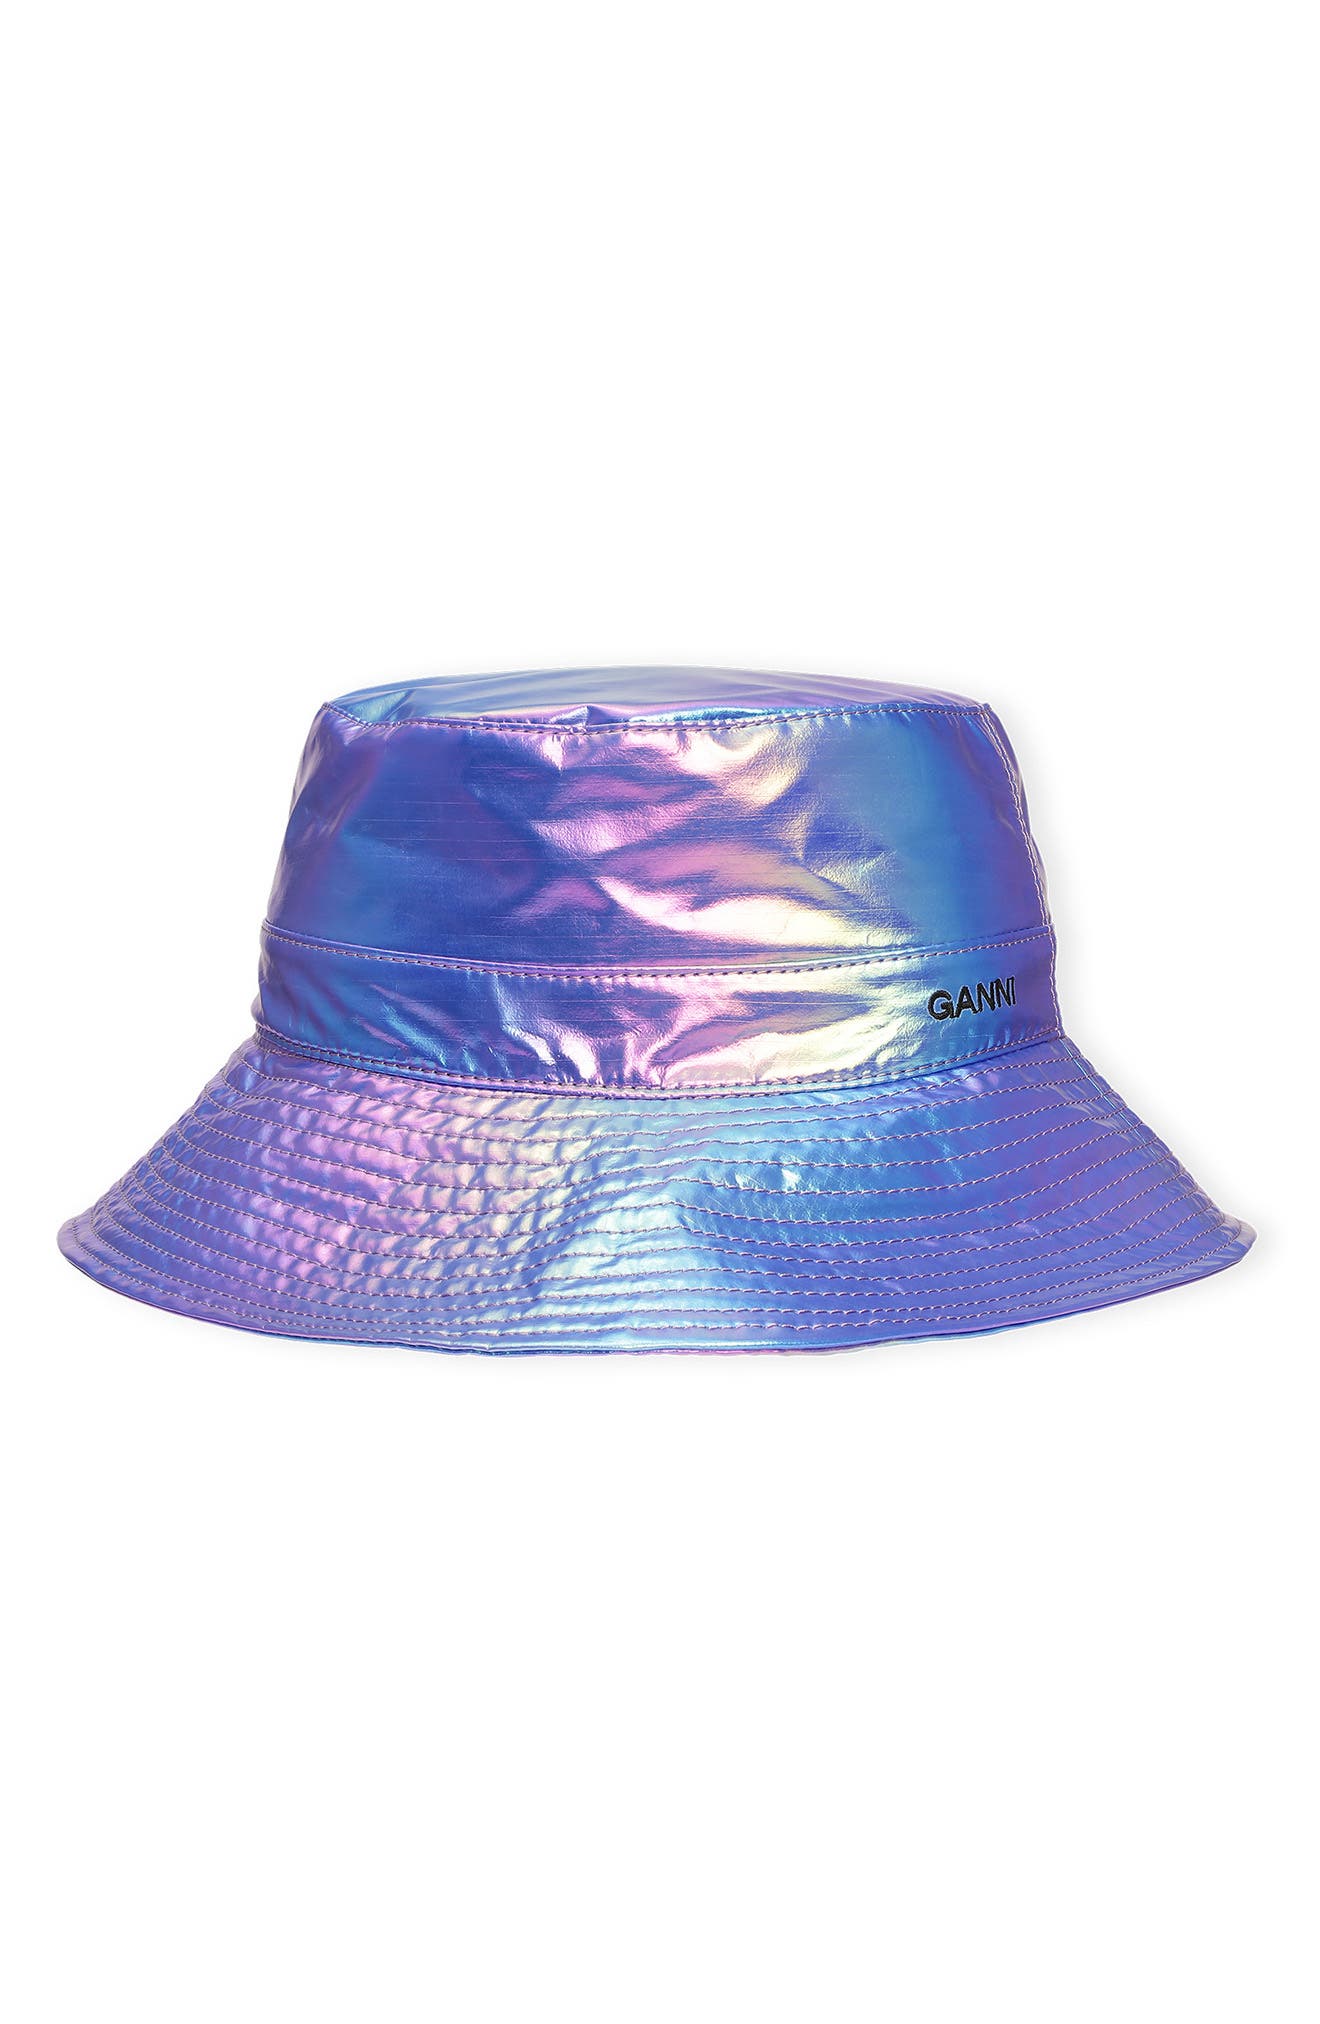 Ganni Recycled Polyester Bucket Hat in Rainbow at Nordstrom, Size X-Small